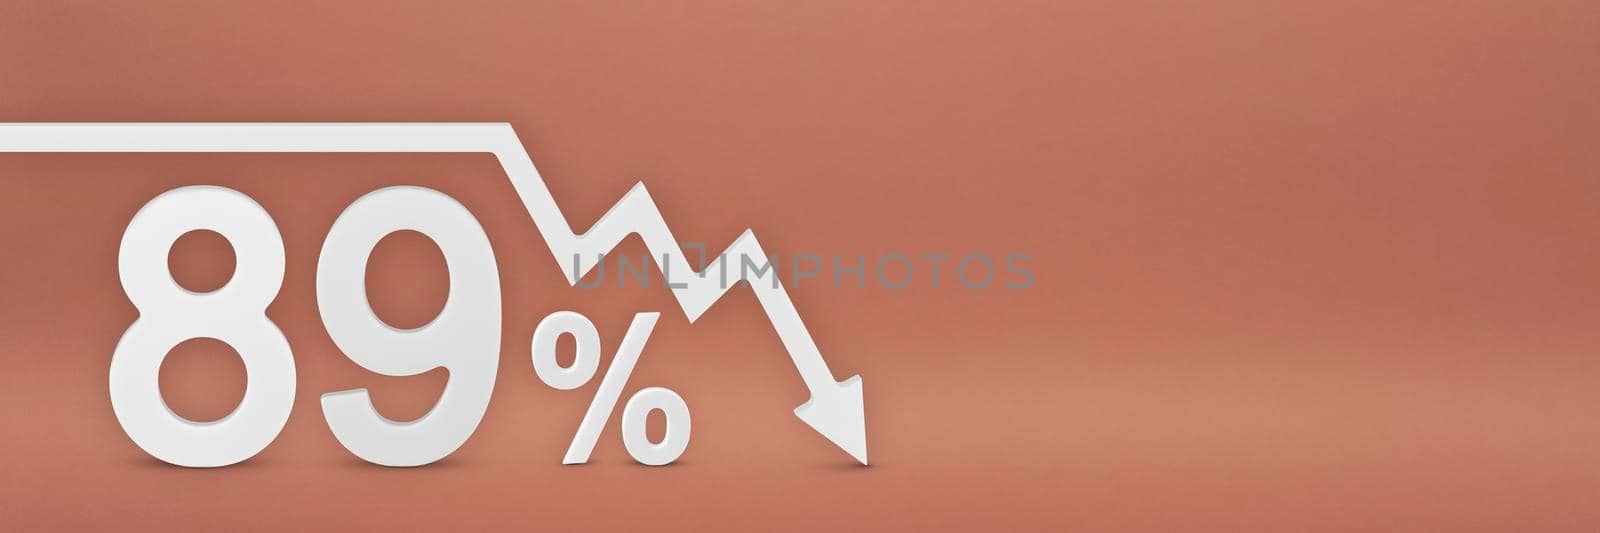 eighty-nine percent, the arrow on the graph is pointing down. Stock market crash, bear market, inflation.Economic collapse, collapse of stocks.3d banner,89 percent discount sign on a red background